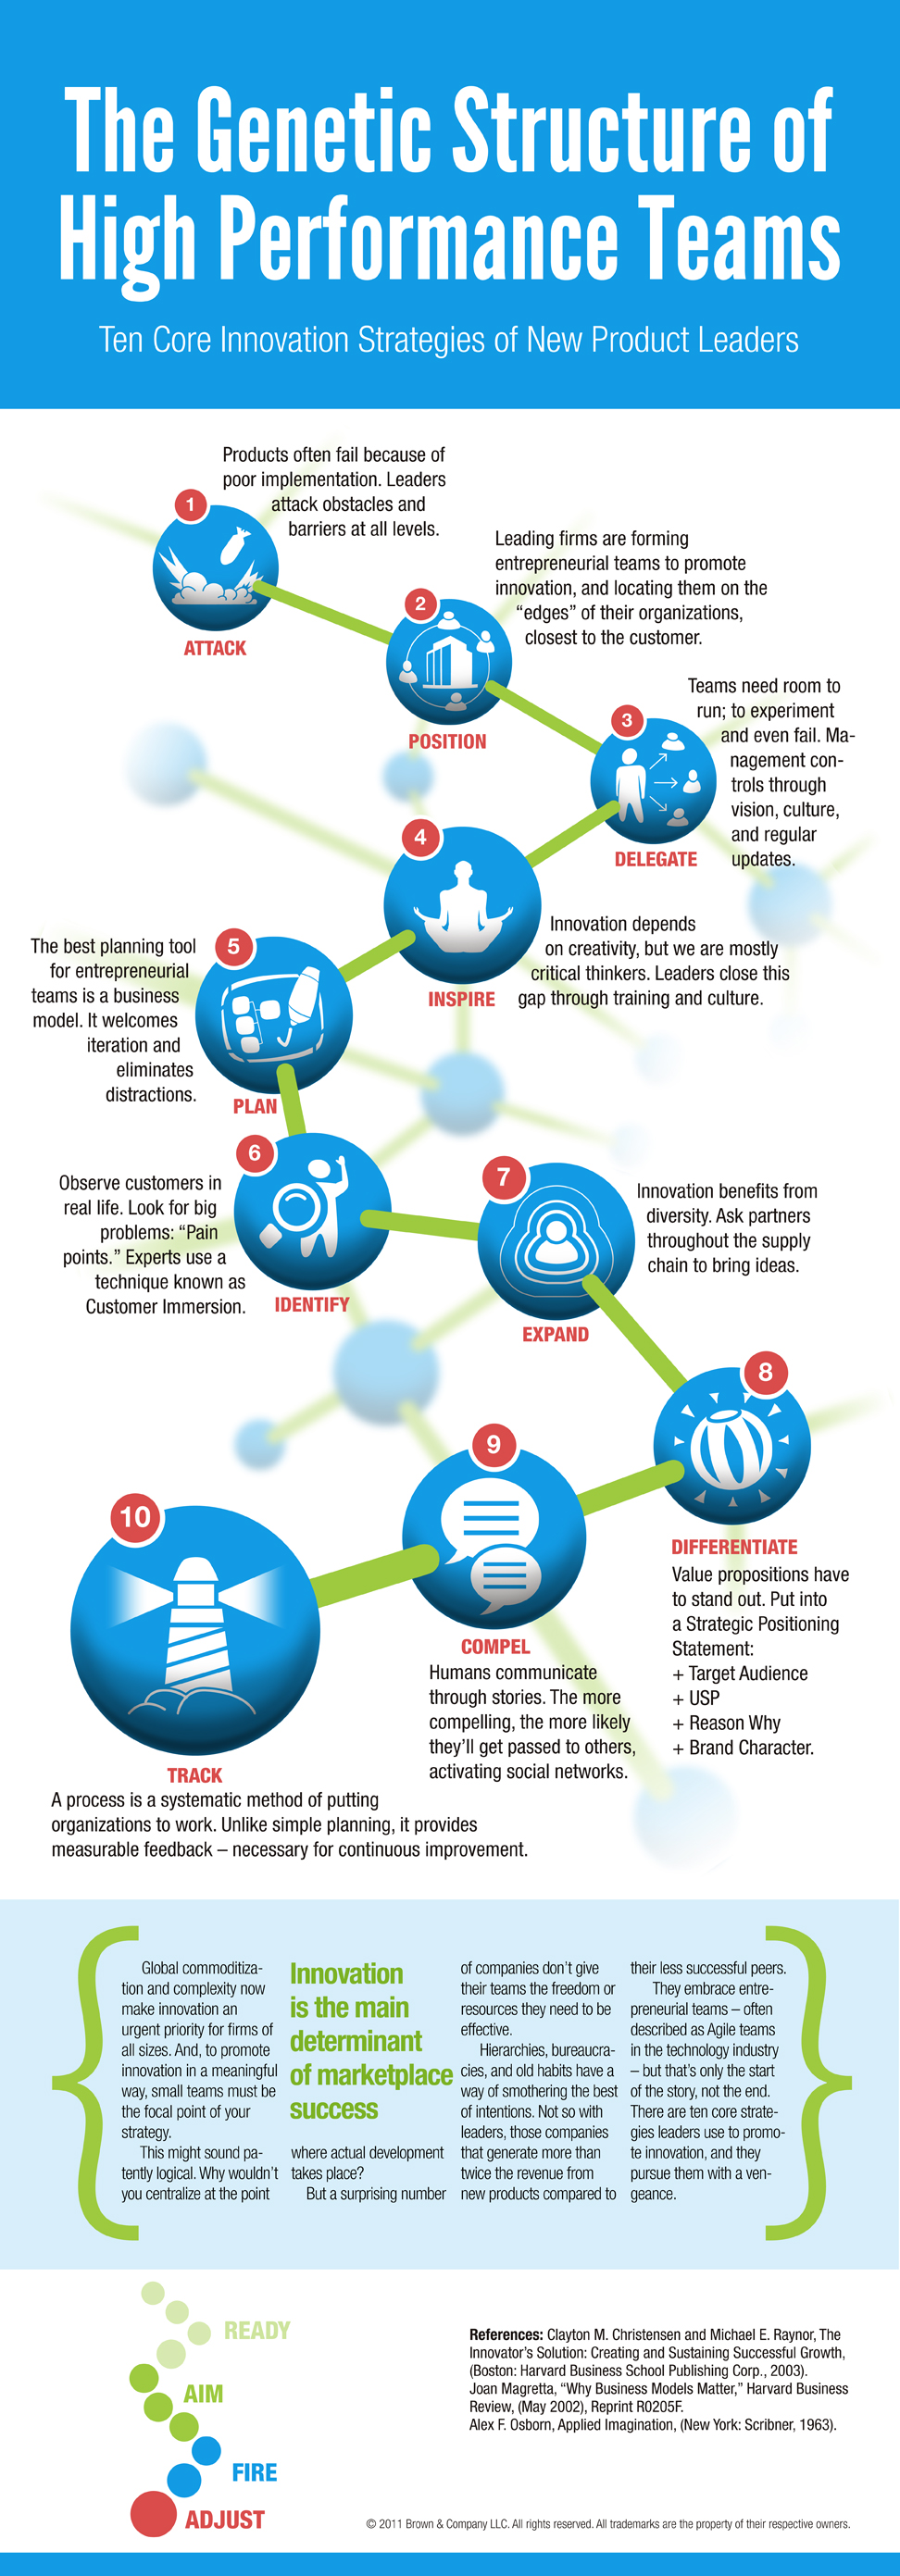 Genetic Structure of High-Performance Teams infographic